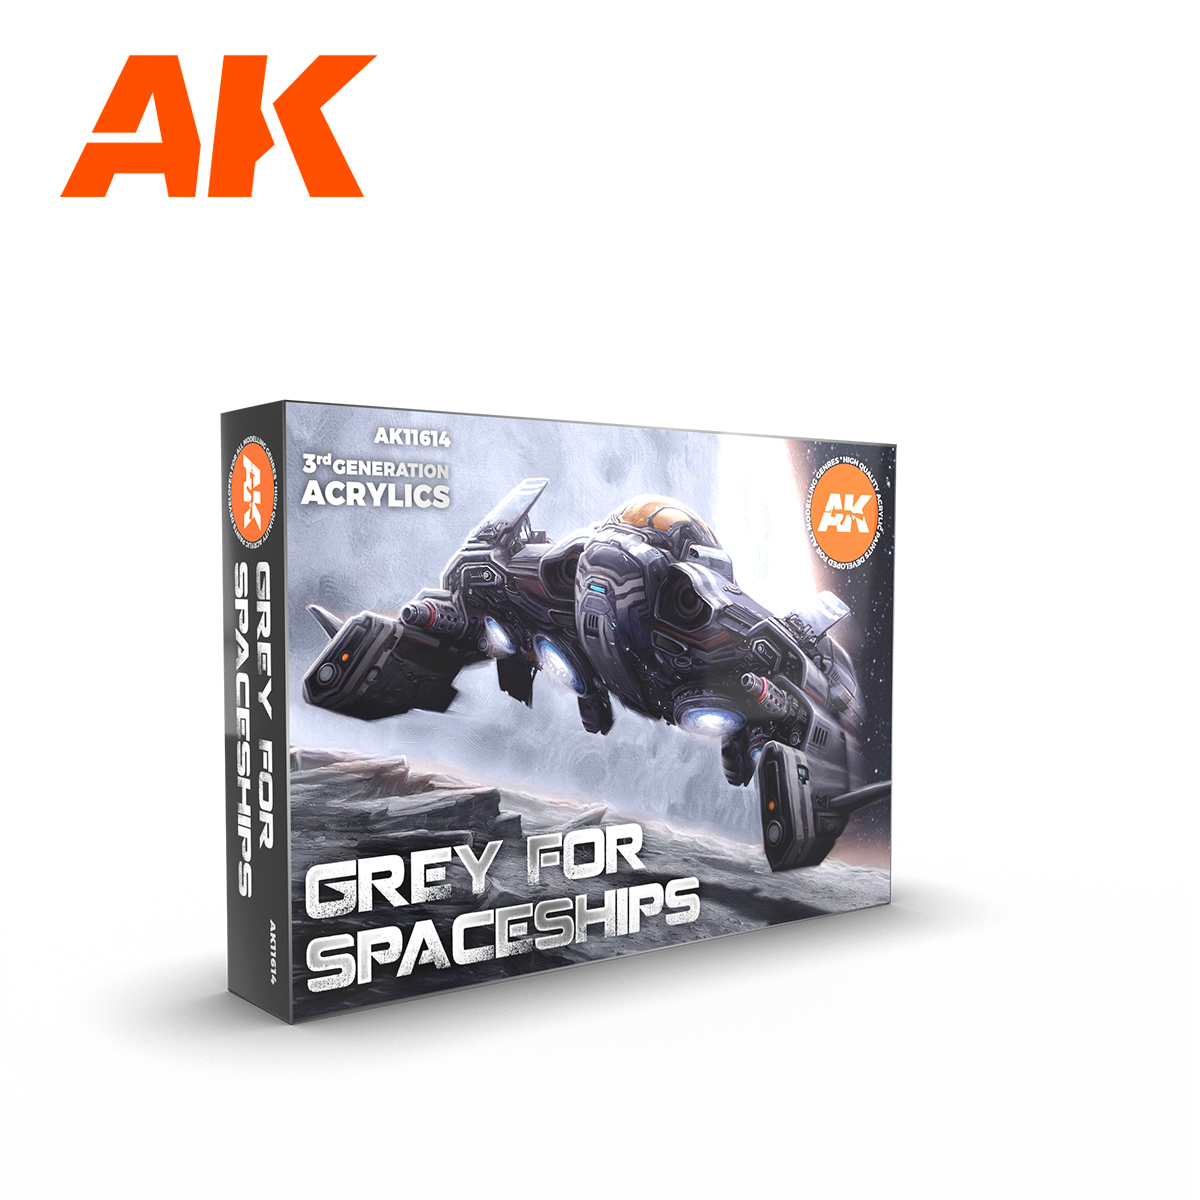 GREY FOR SPACESHIPS SET